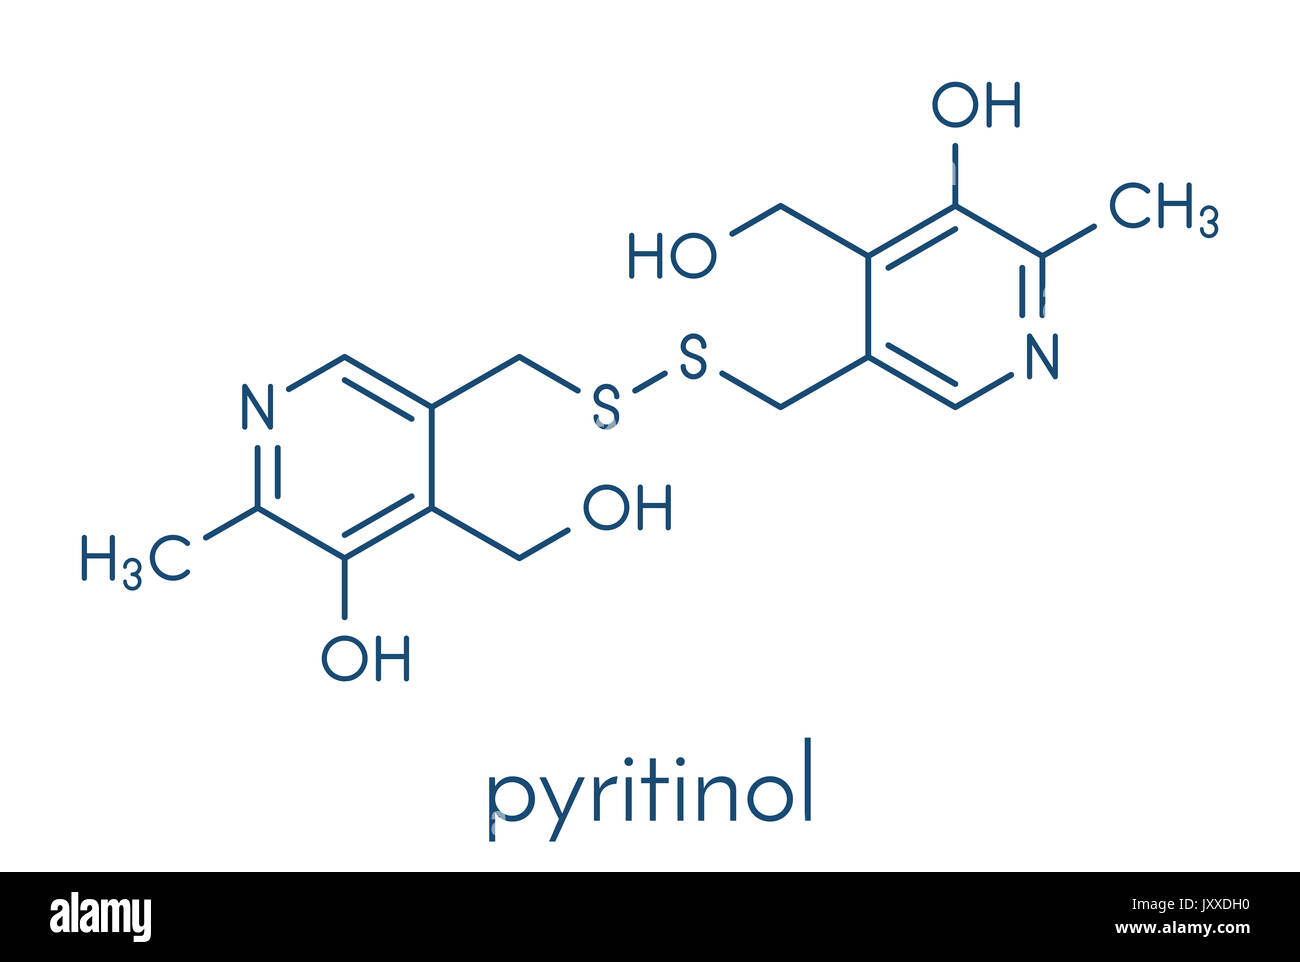 Pyritinol (pyridoxine disulfide) cognitive and learning disorder drug molecule. Also used in nootropic dietary supplements. Skeletal formula. Stock Photo